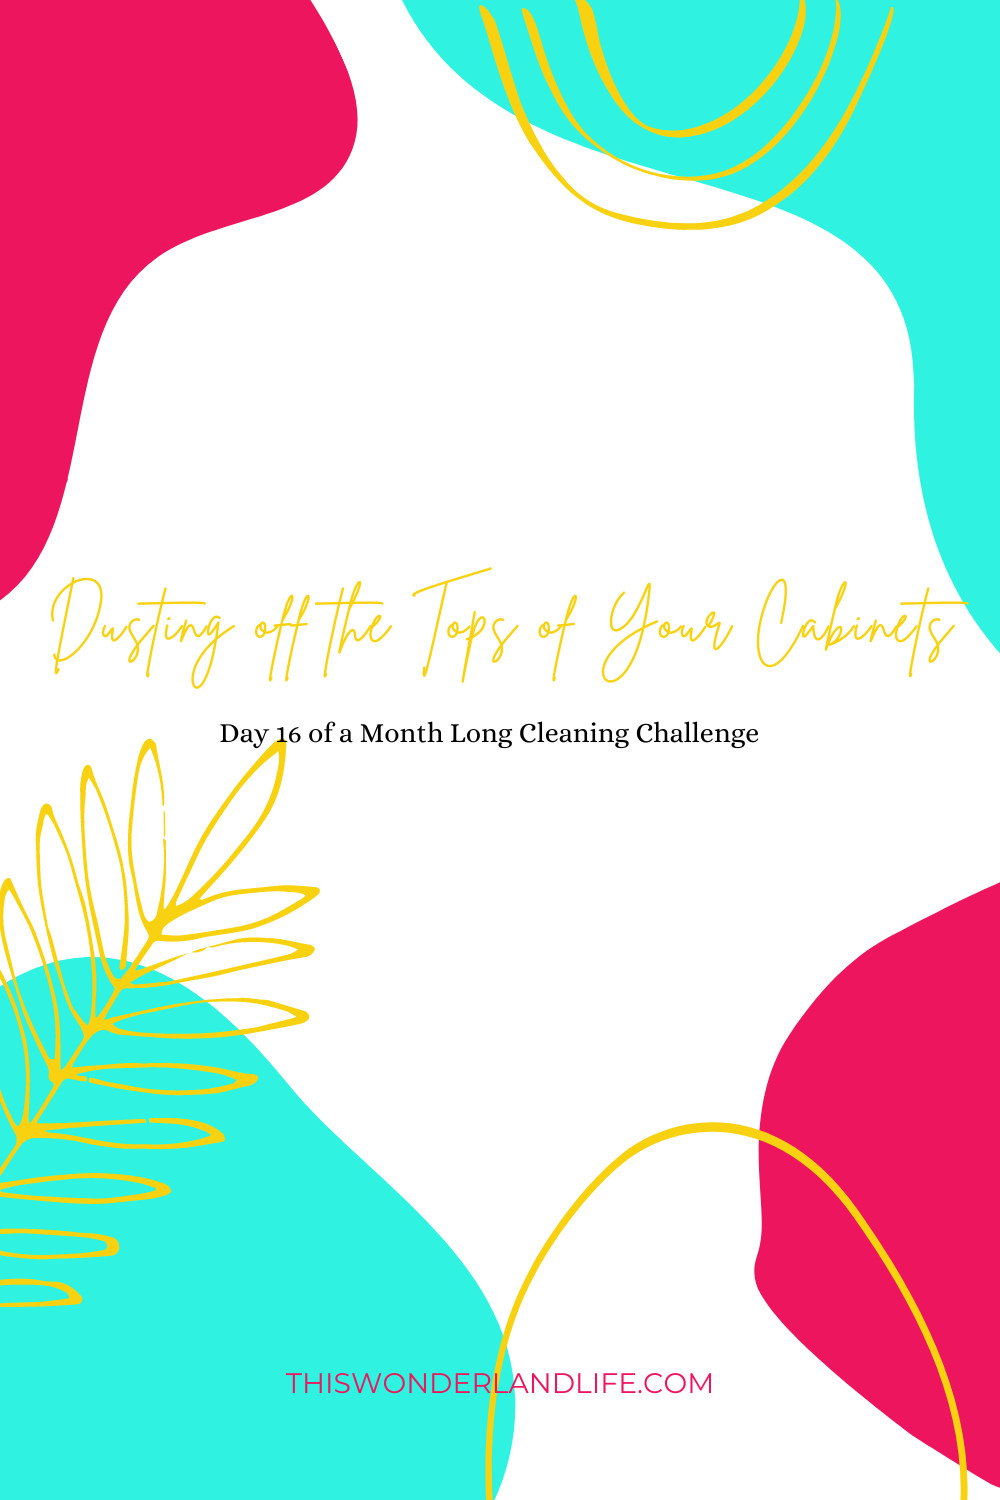  Day 16 of a Month Long Cleaning Challenge - Dusting off the Tops of Your Cabinets